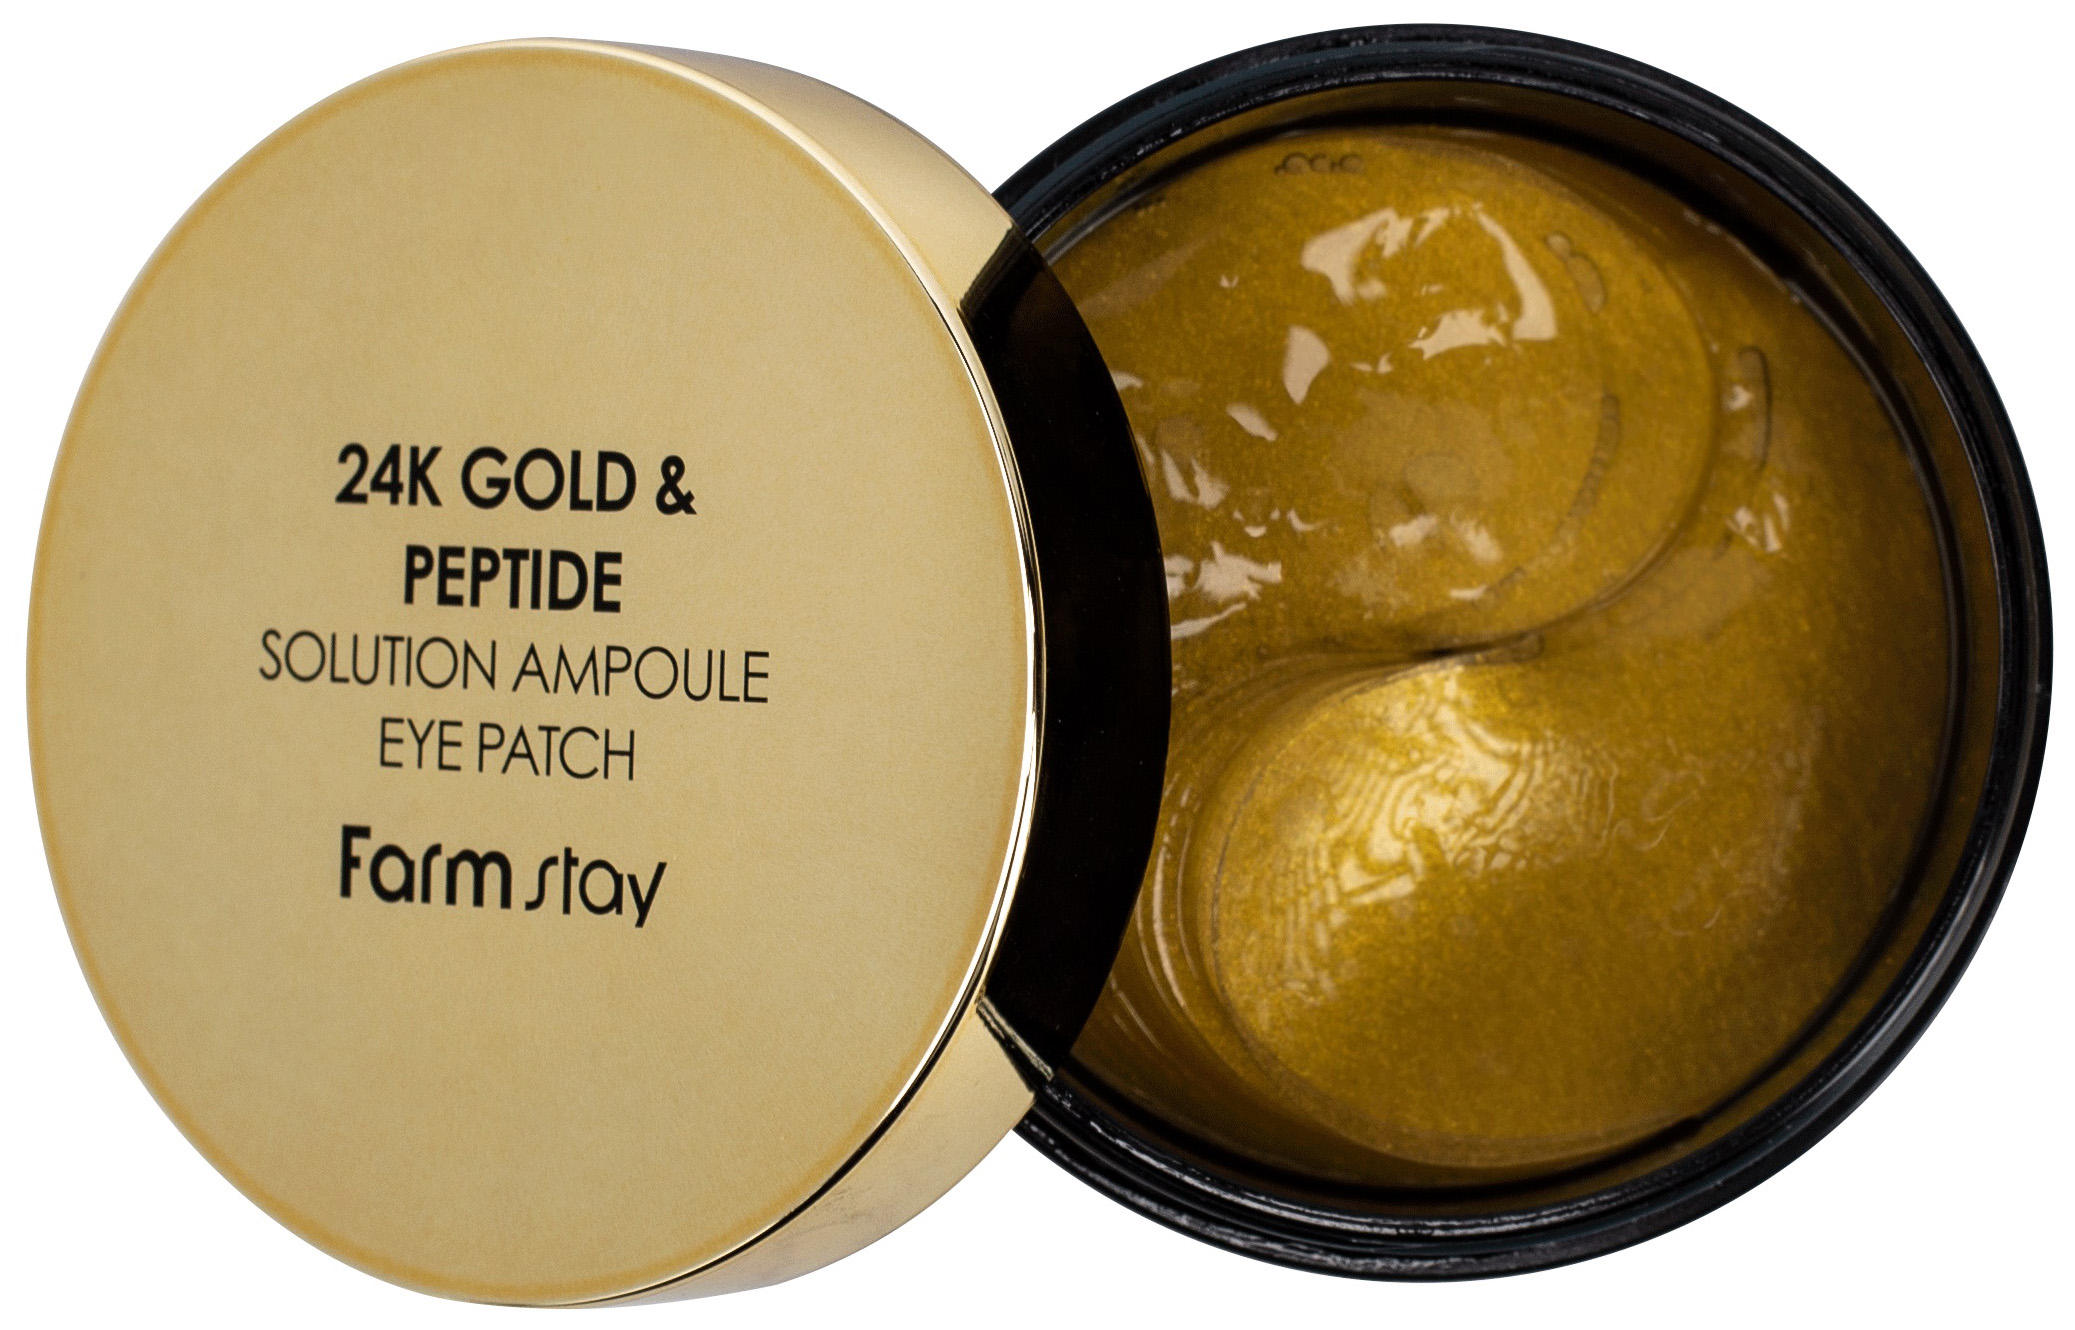 Патчи для глаз Farm Stay 24K Gold & Peptide Solution Ampoule Eye Patch 90 г патчи со змеиным пептидом trimay emerald syn ake peptide lifting eye patch 90 шт